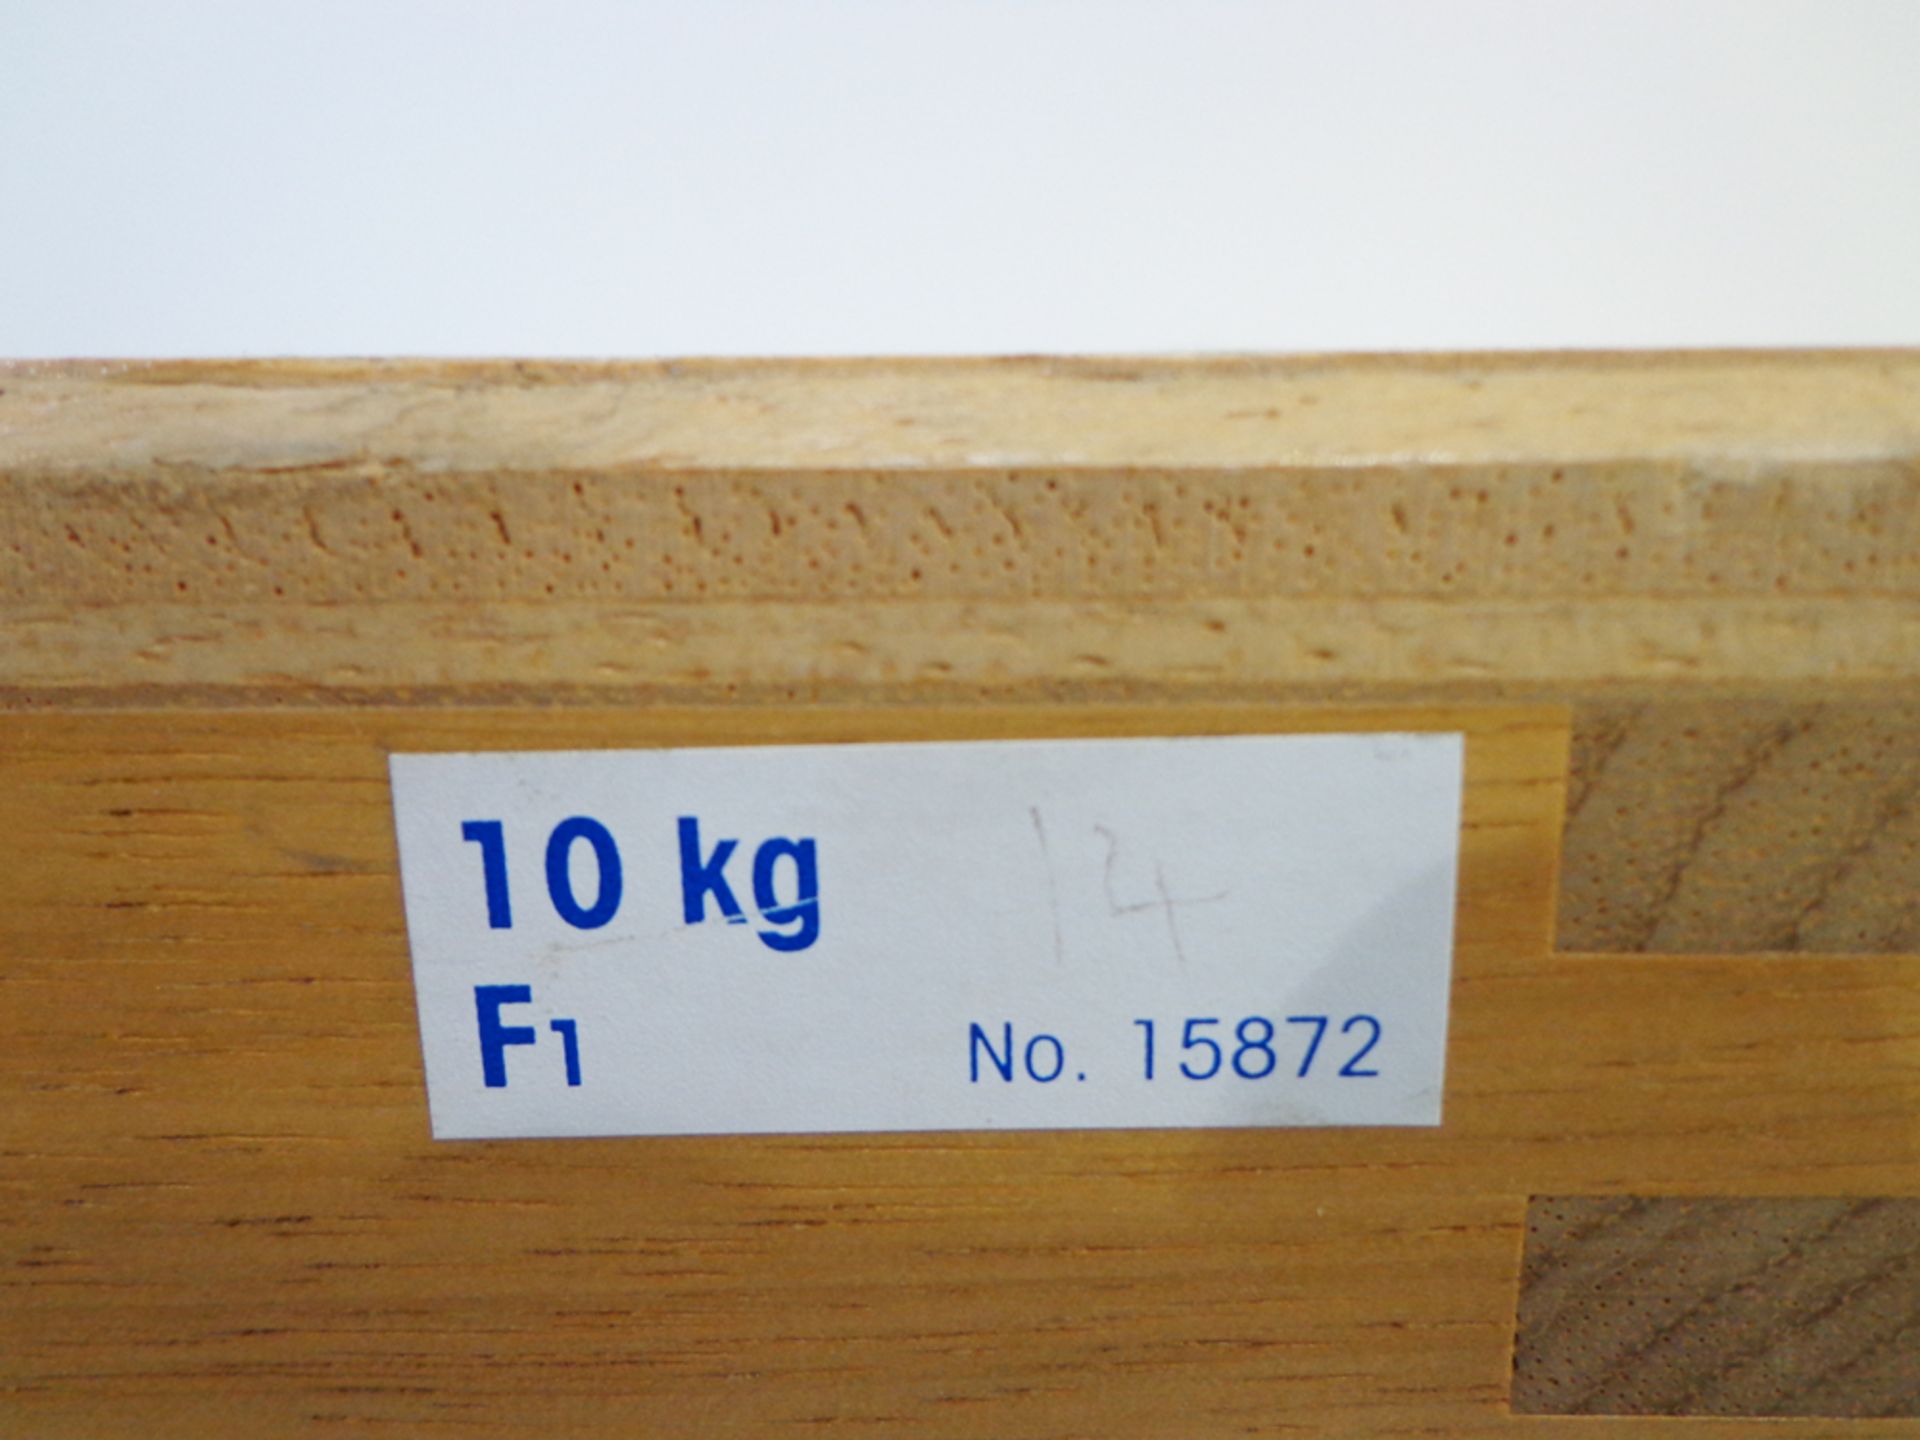 Mettler Toledo Single 10kg F1 Stainless Steel Calibration Weight in Wooden Box, Ref 15872 - Image 4 of 4